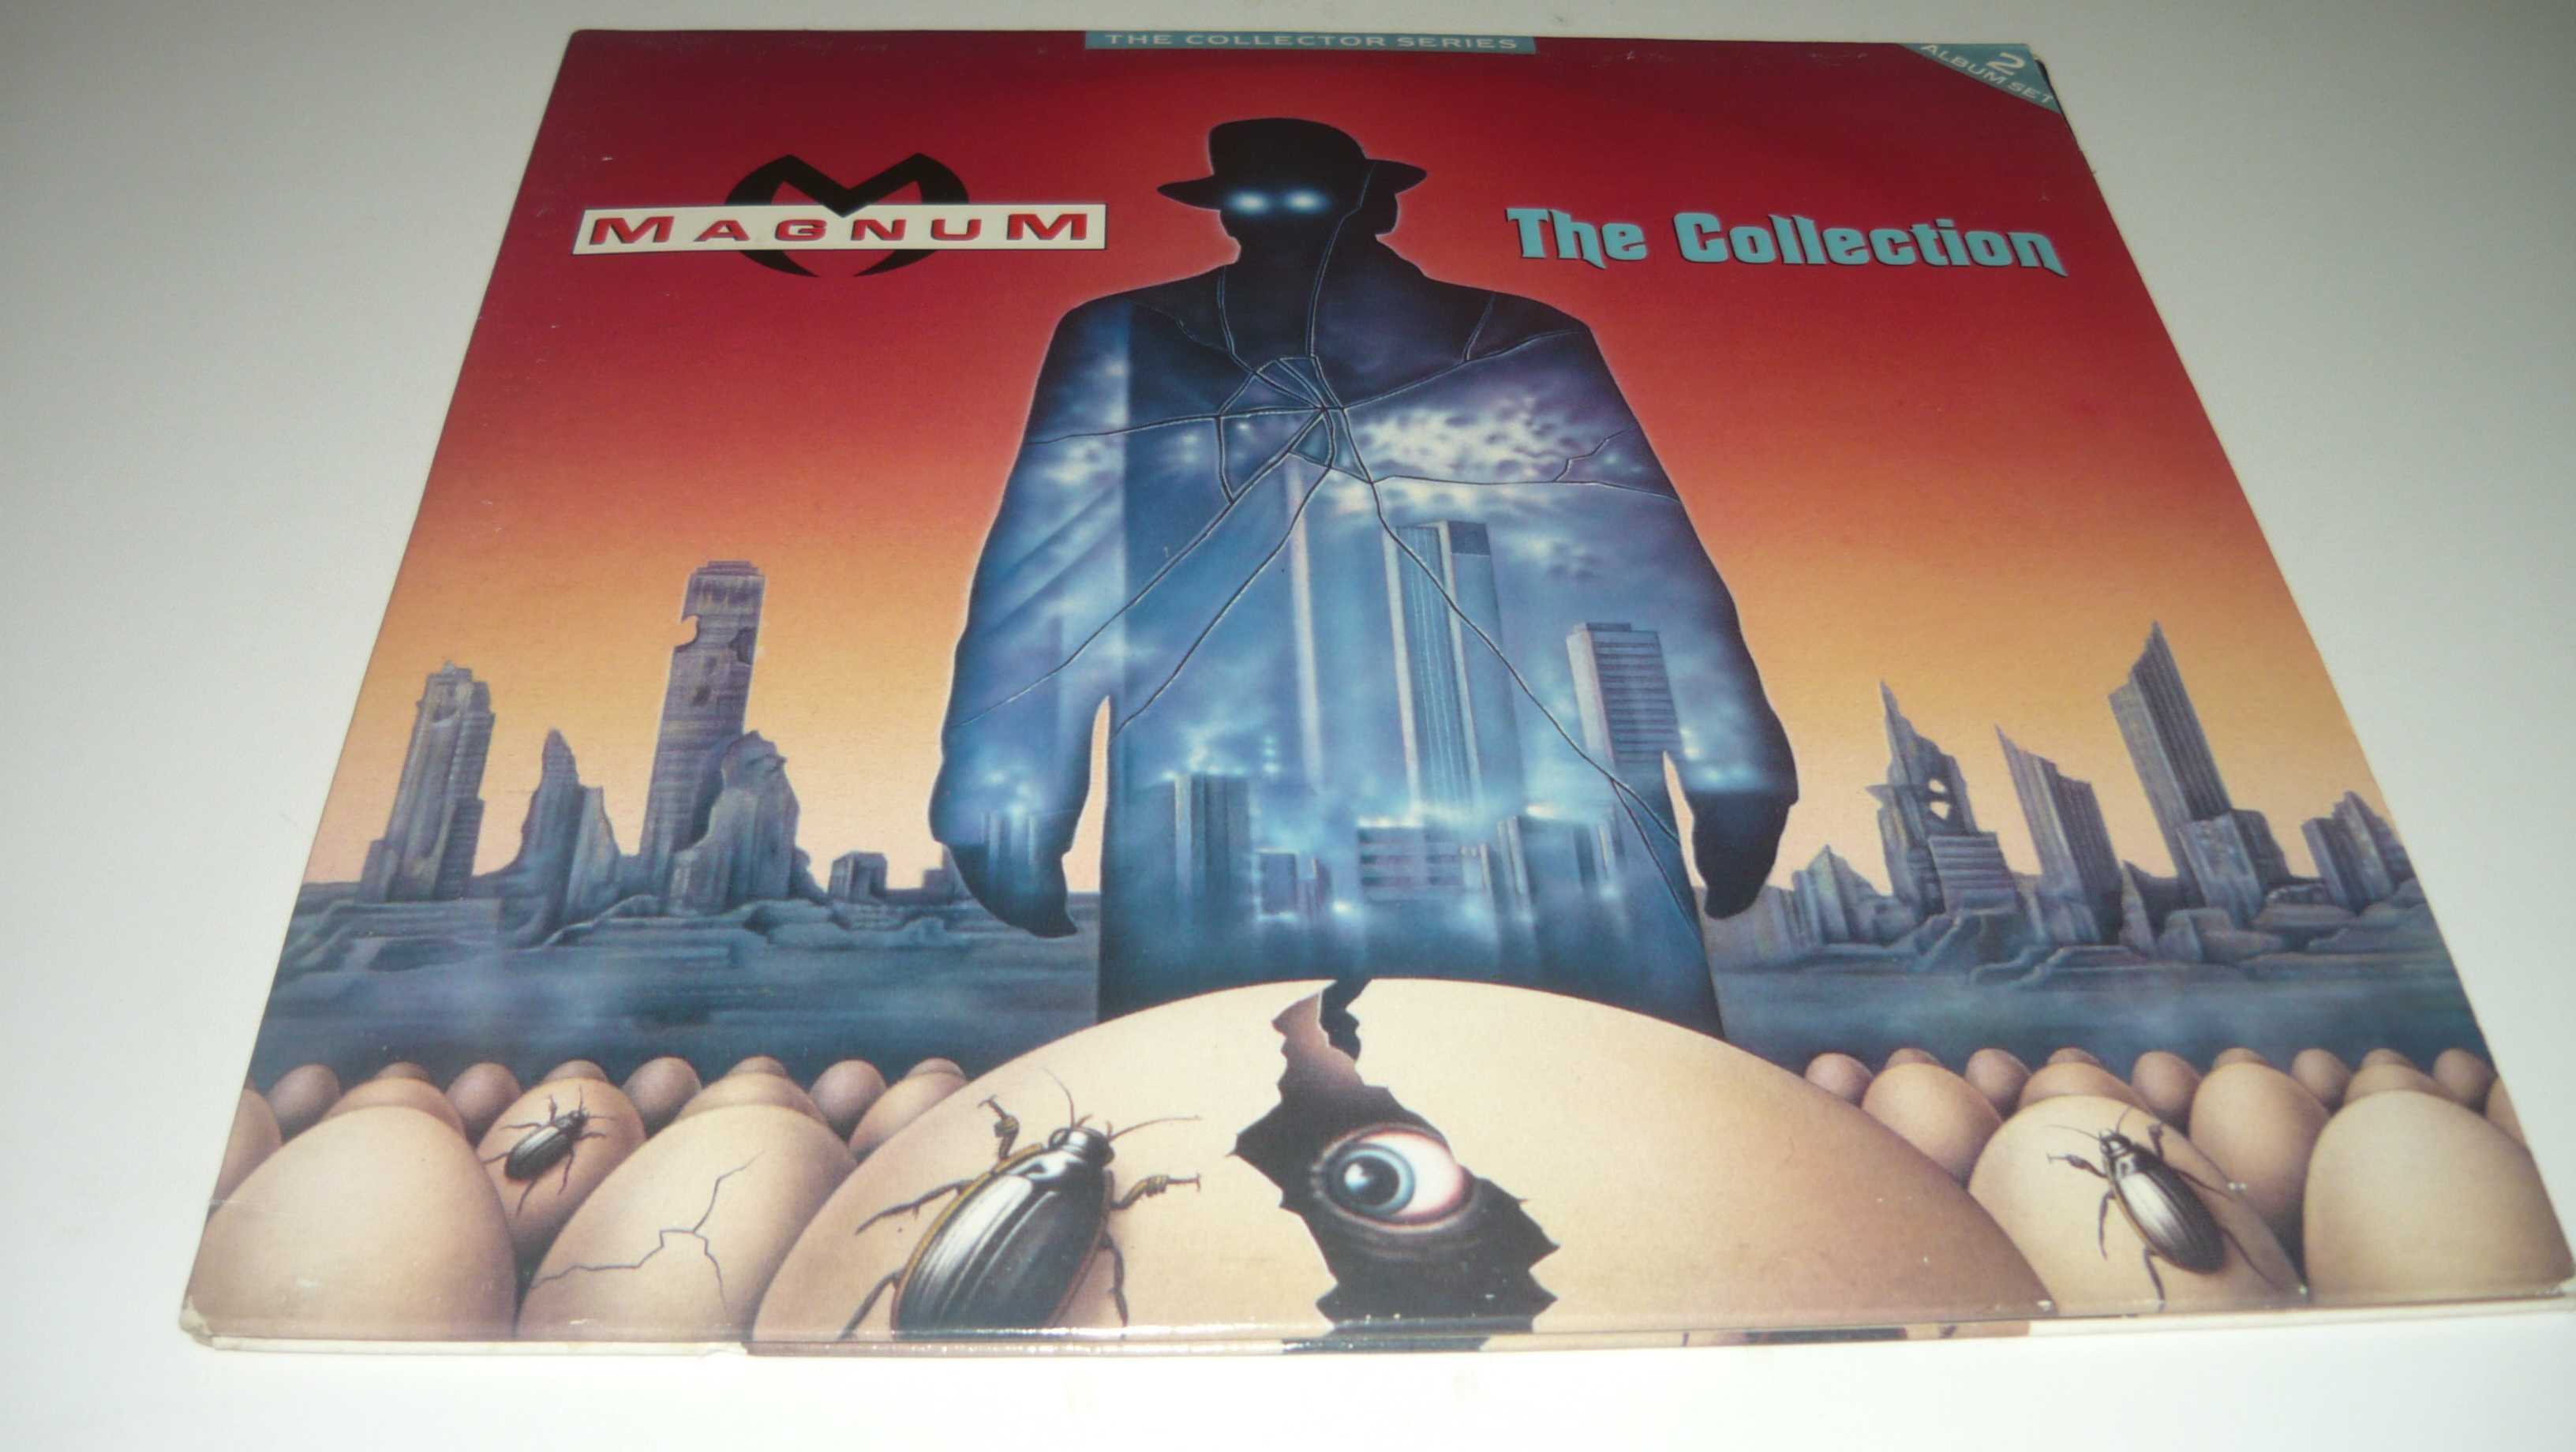 Magnum The collection 2 LP